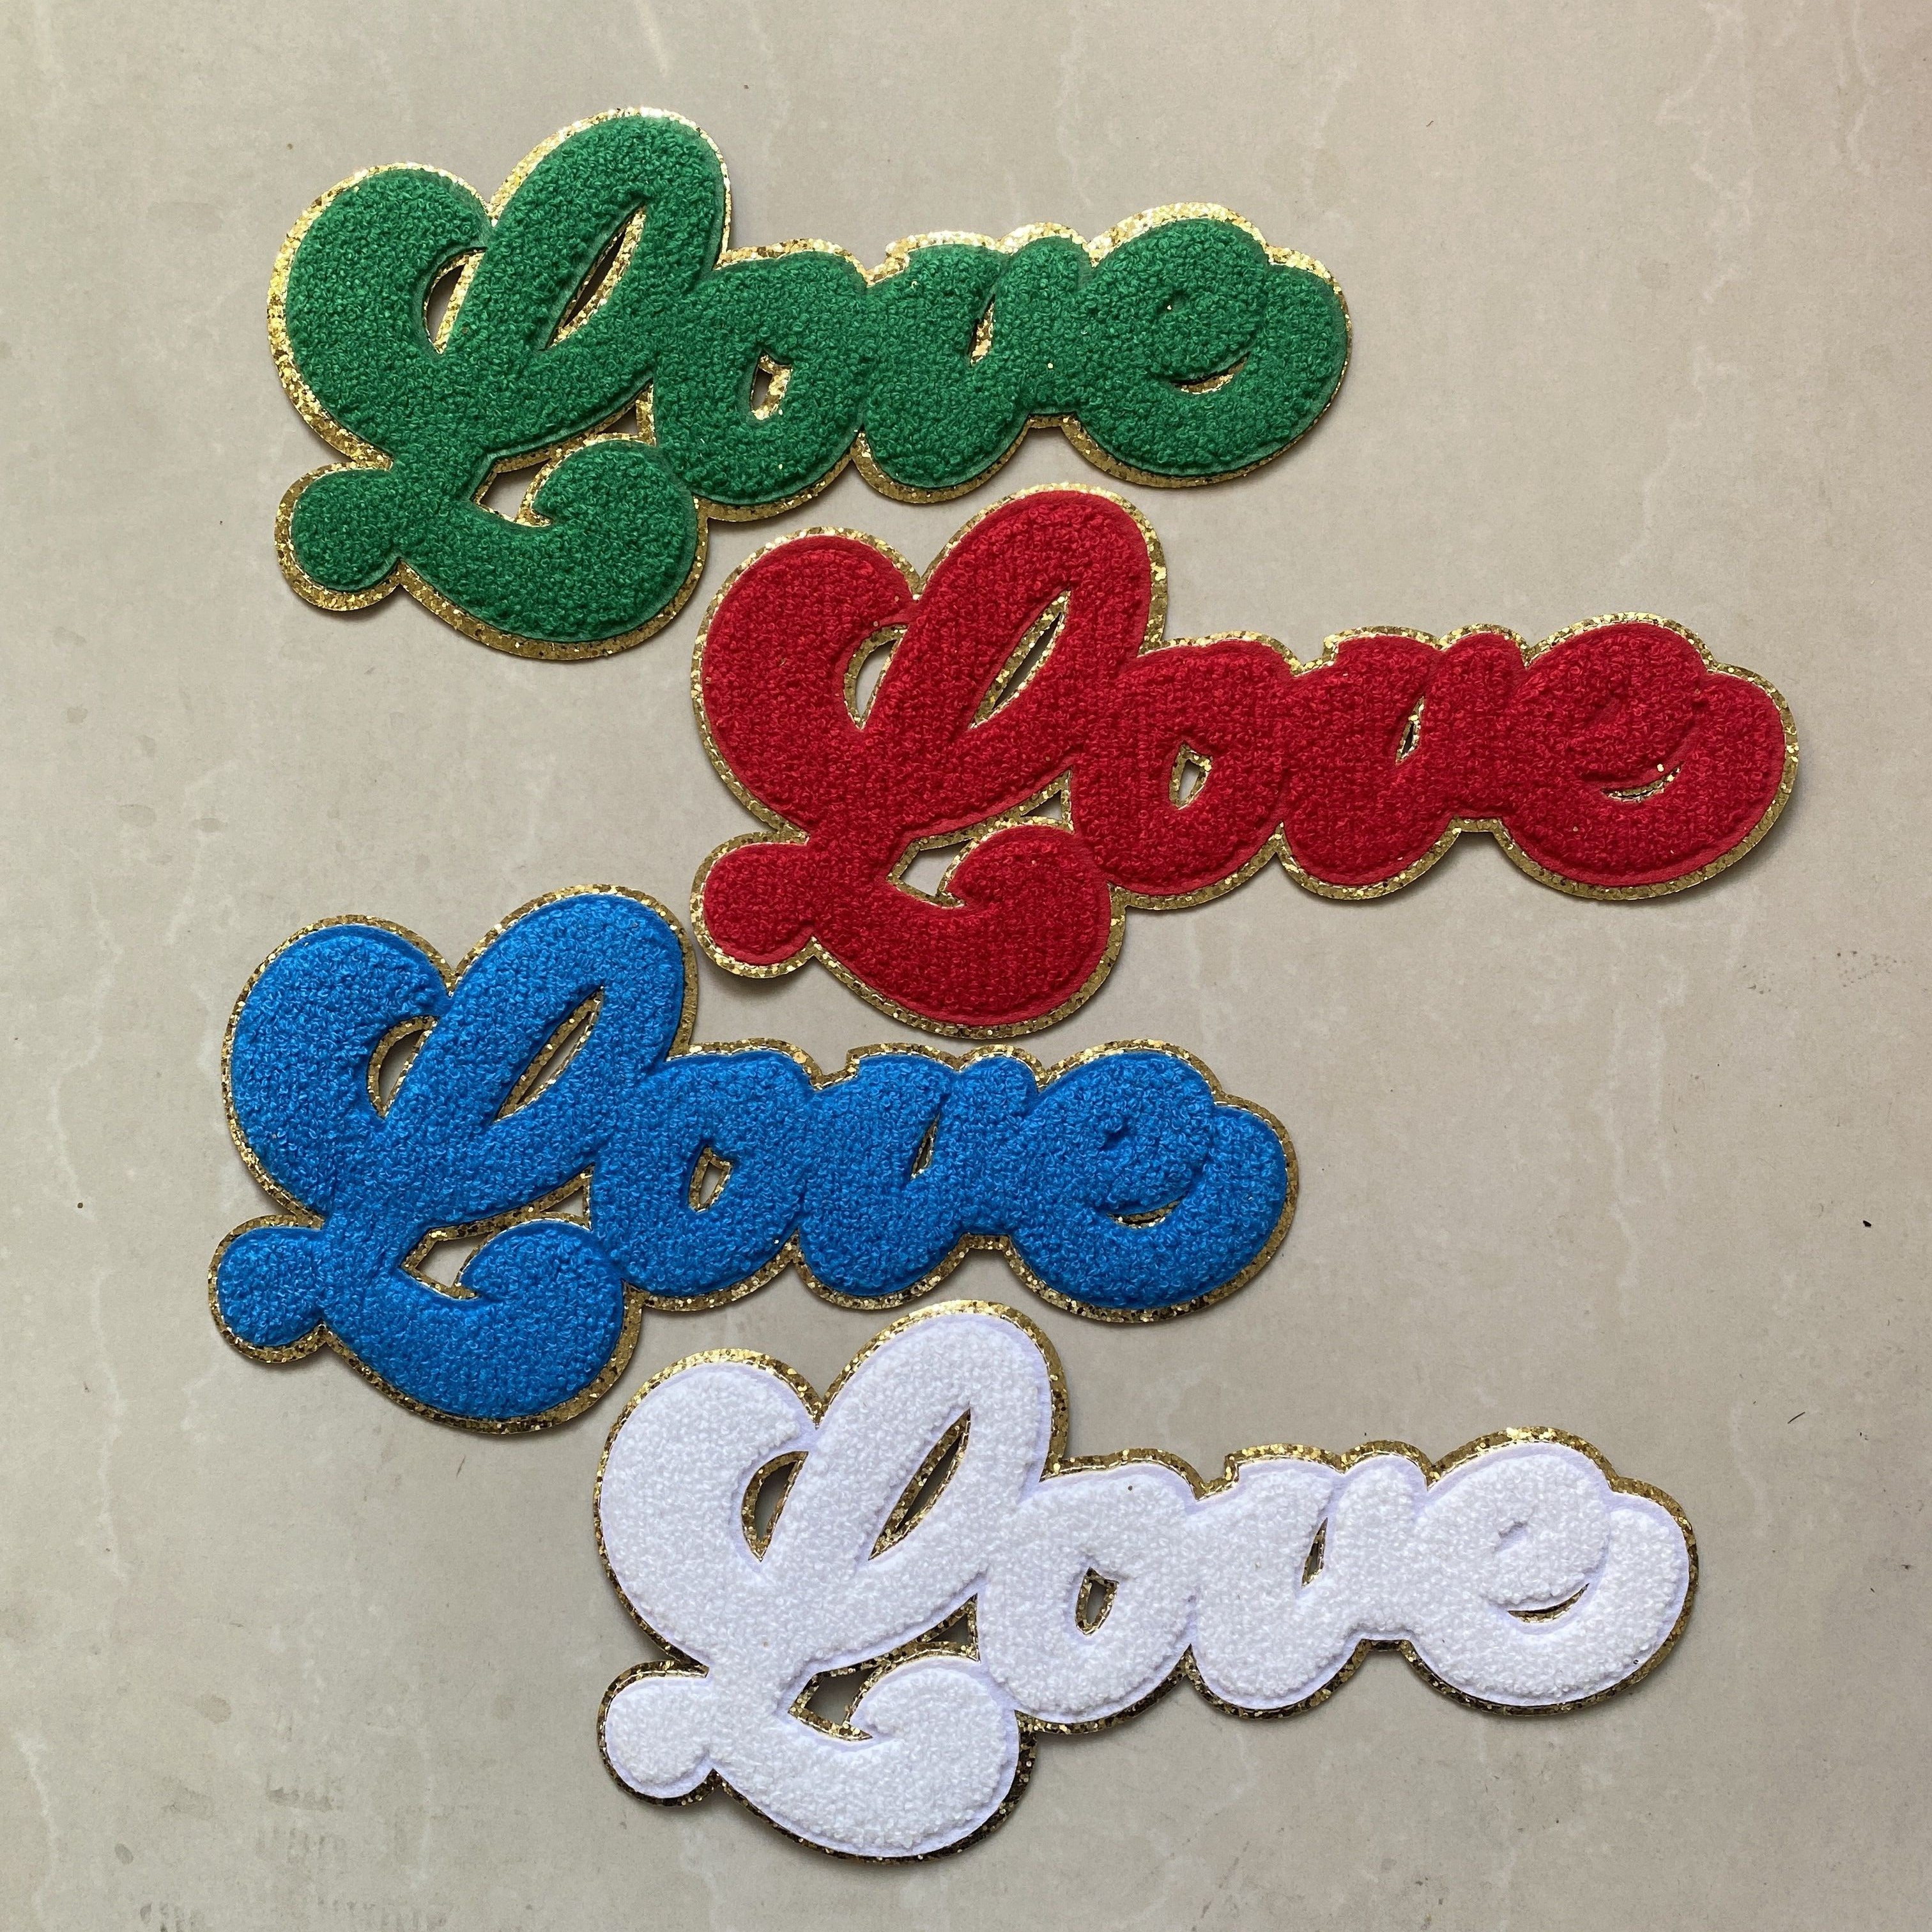 26PCS Multi-Function Embroidered Patches Letter-Shaped Patches Decor Back  Sewing Patches